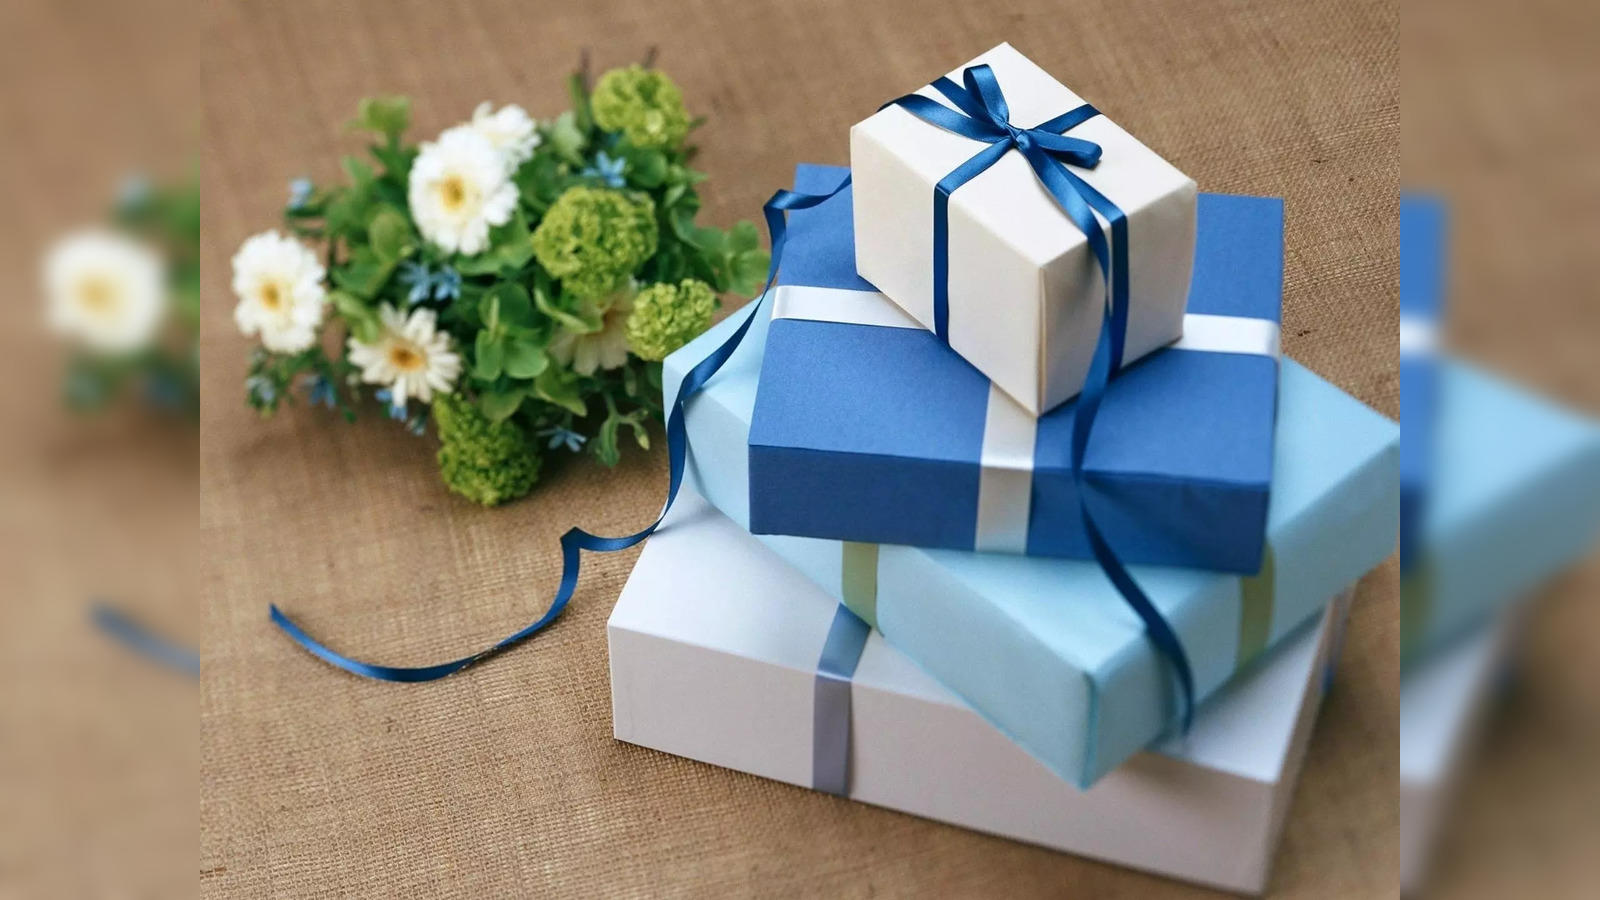 What would be the best birthday gift below Rs. 200? - Quora